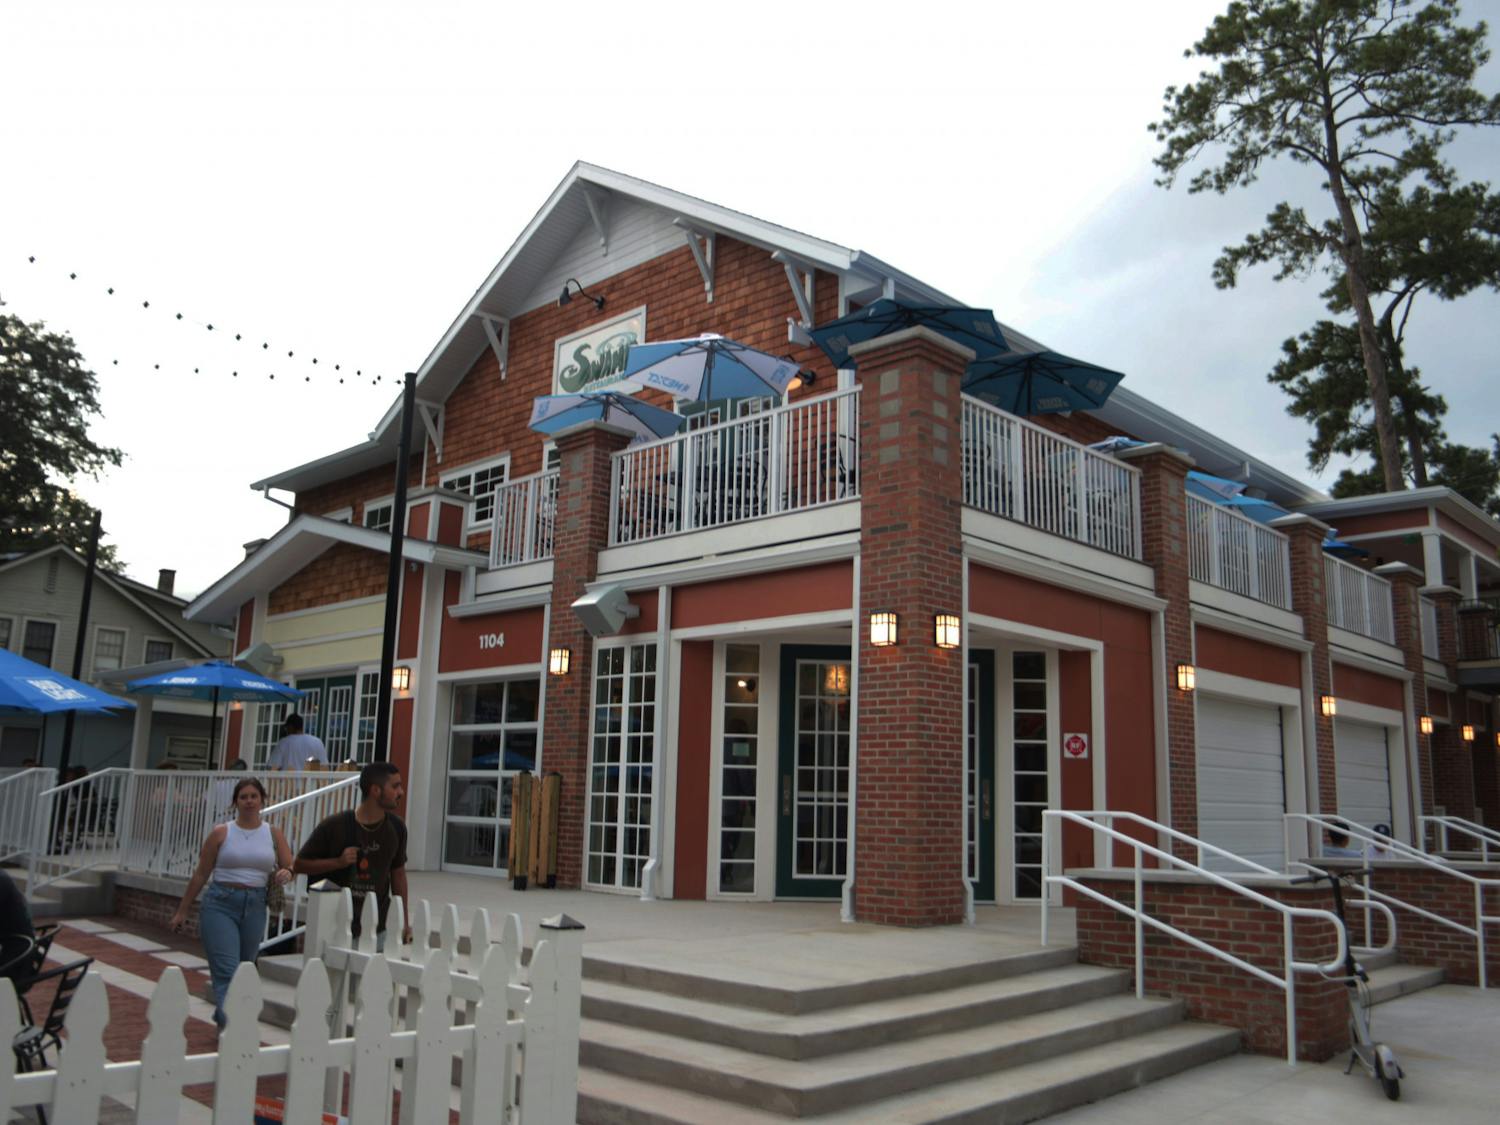 Outside of the re-opening of The Swamp Restaurant on Monday, Aug. 29, 2022.  